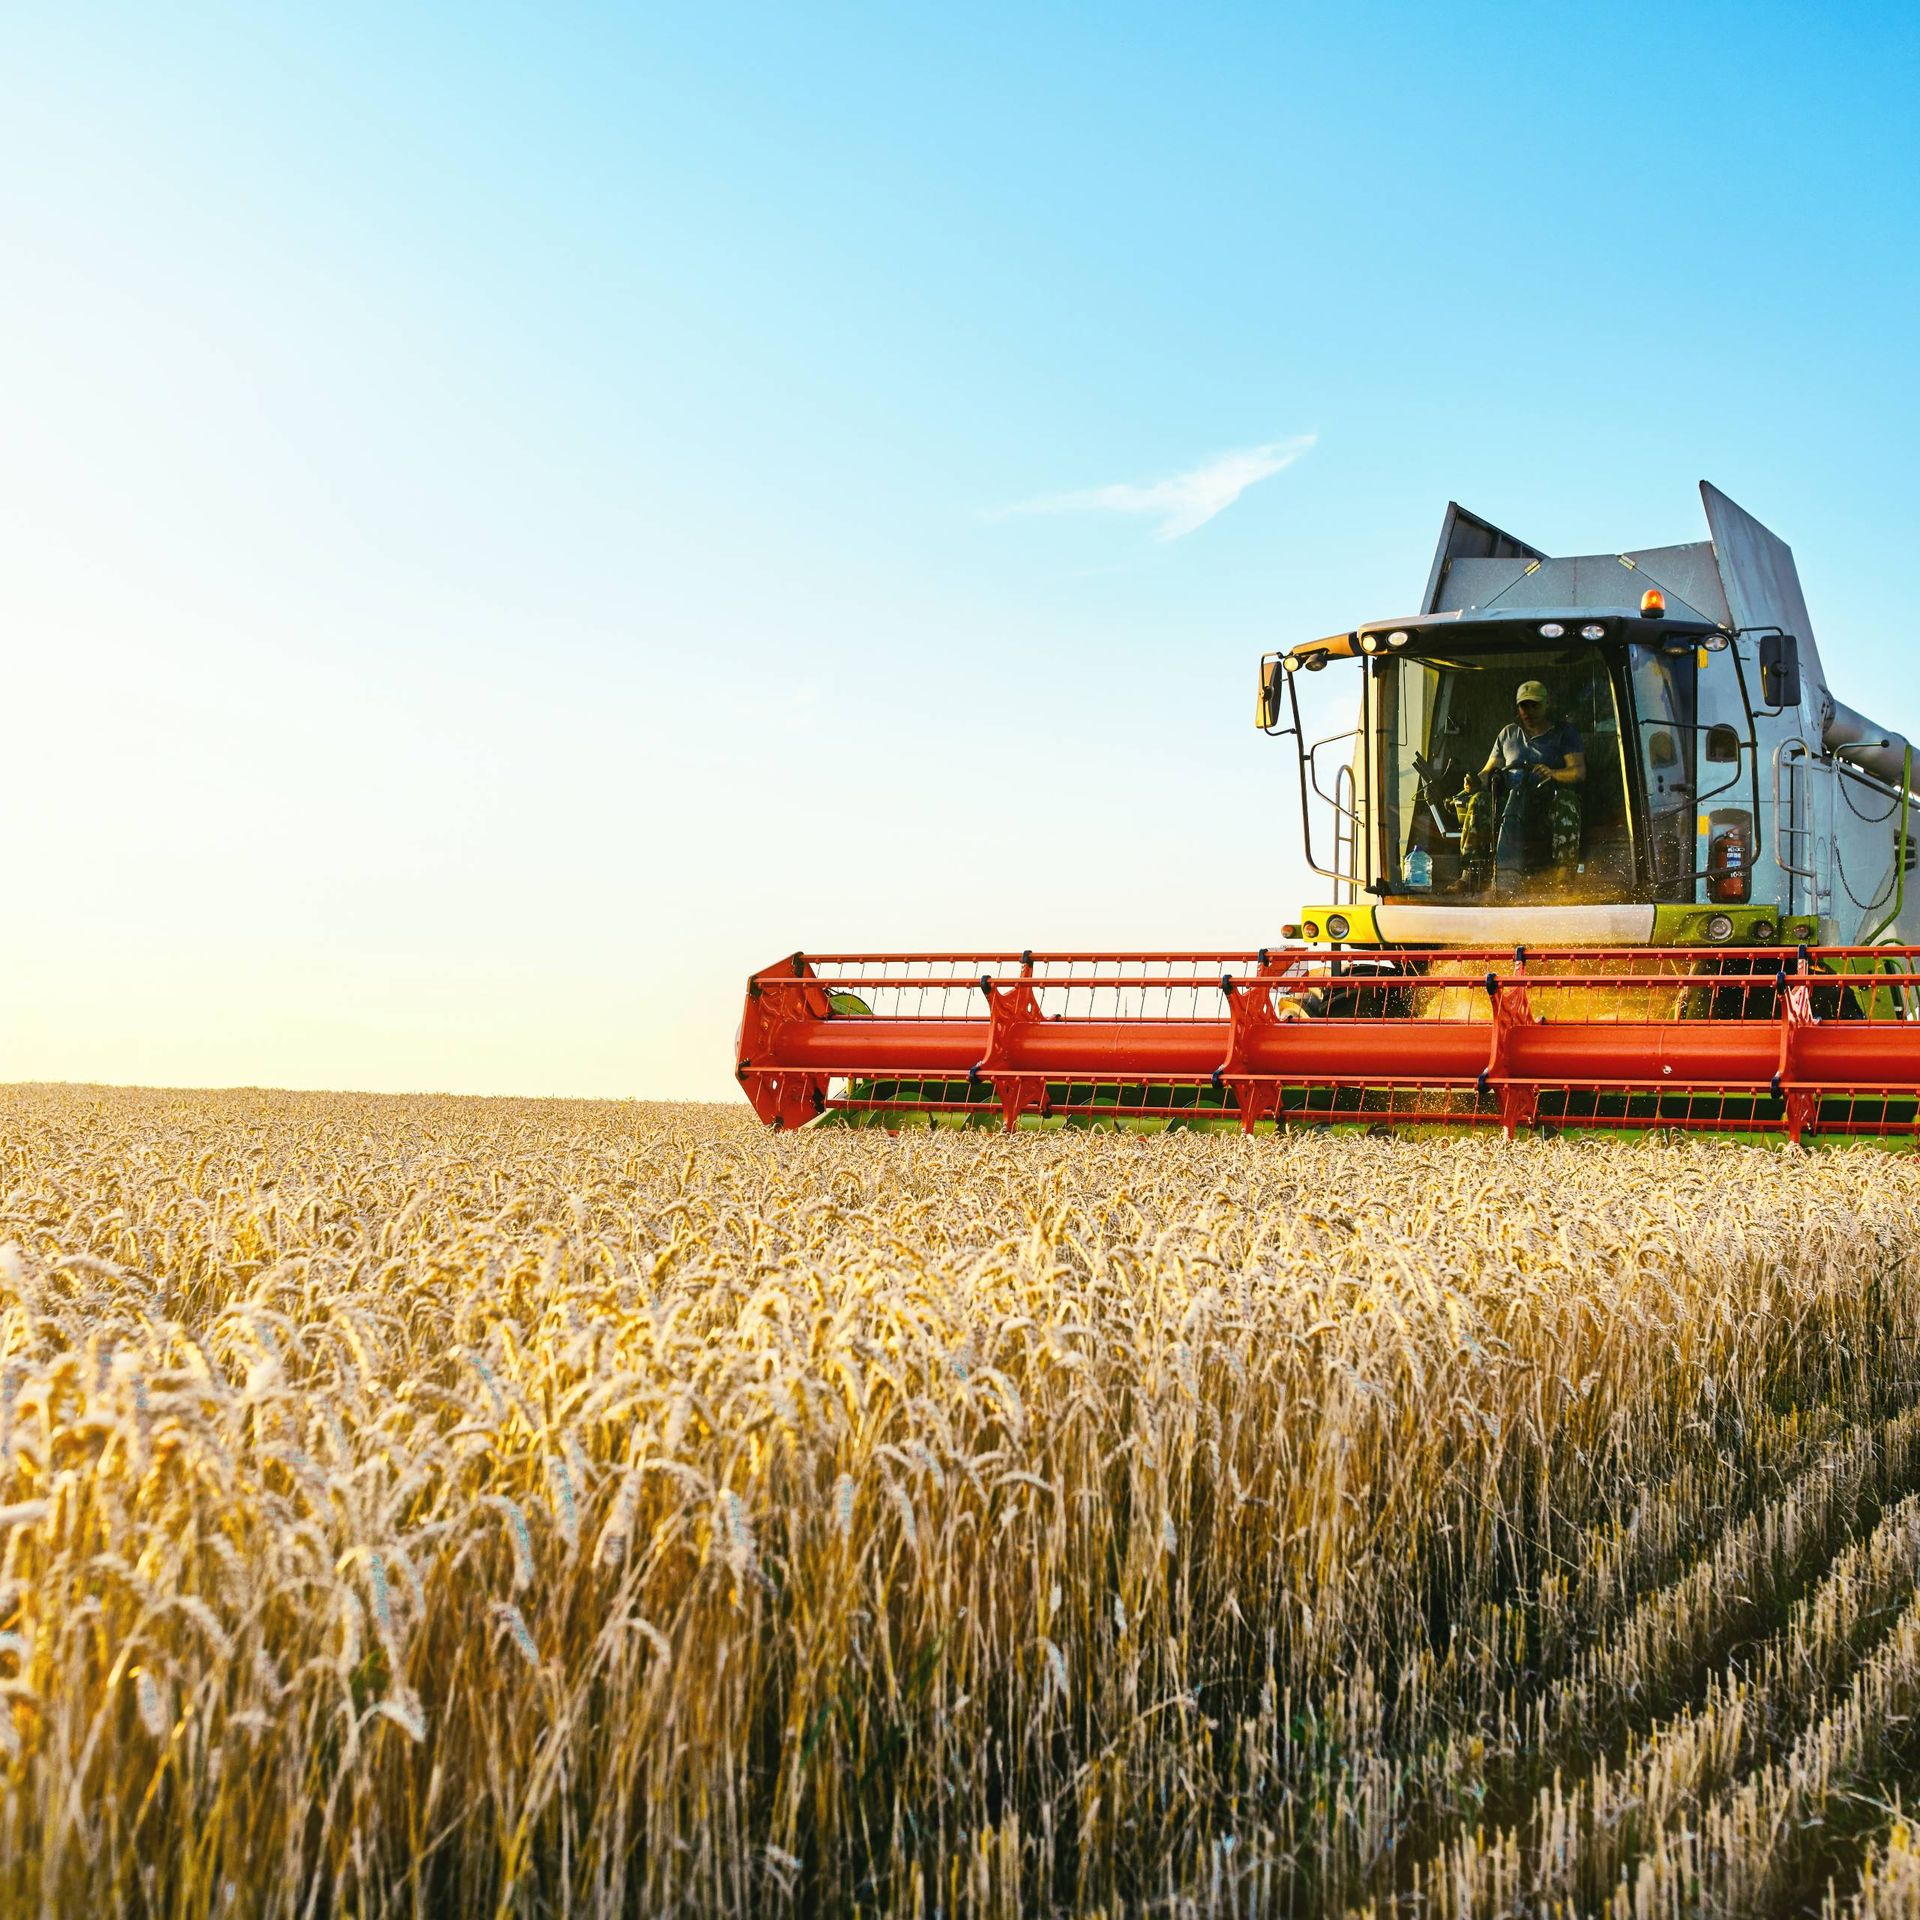 Image of a combine harvester working in a field of wheat